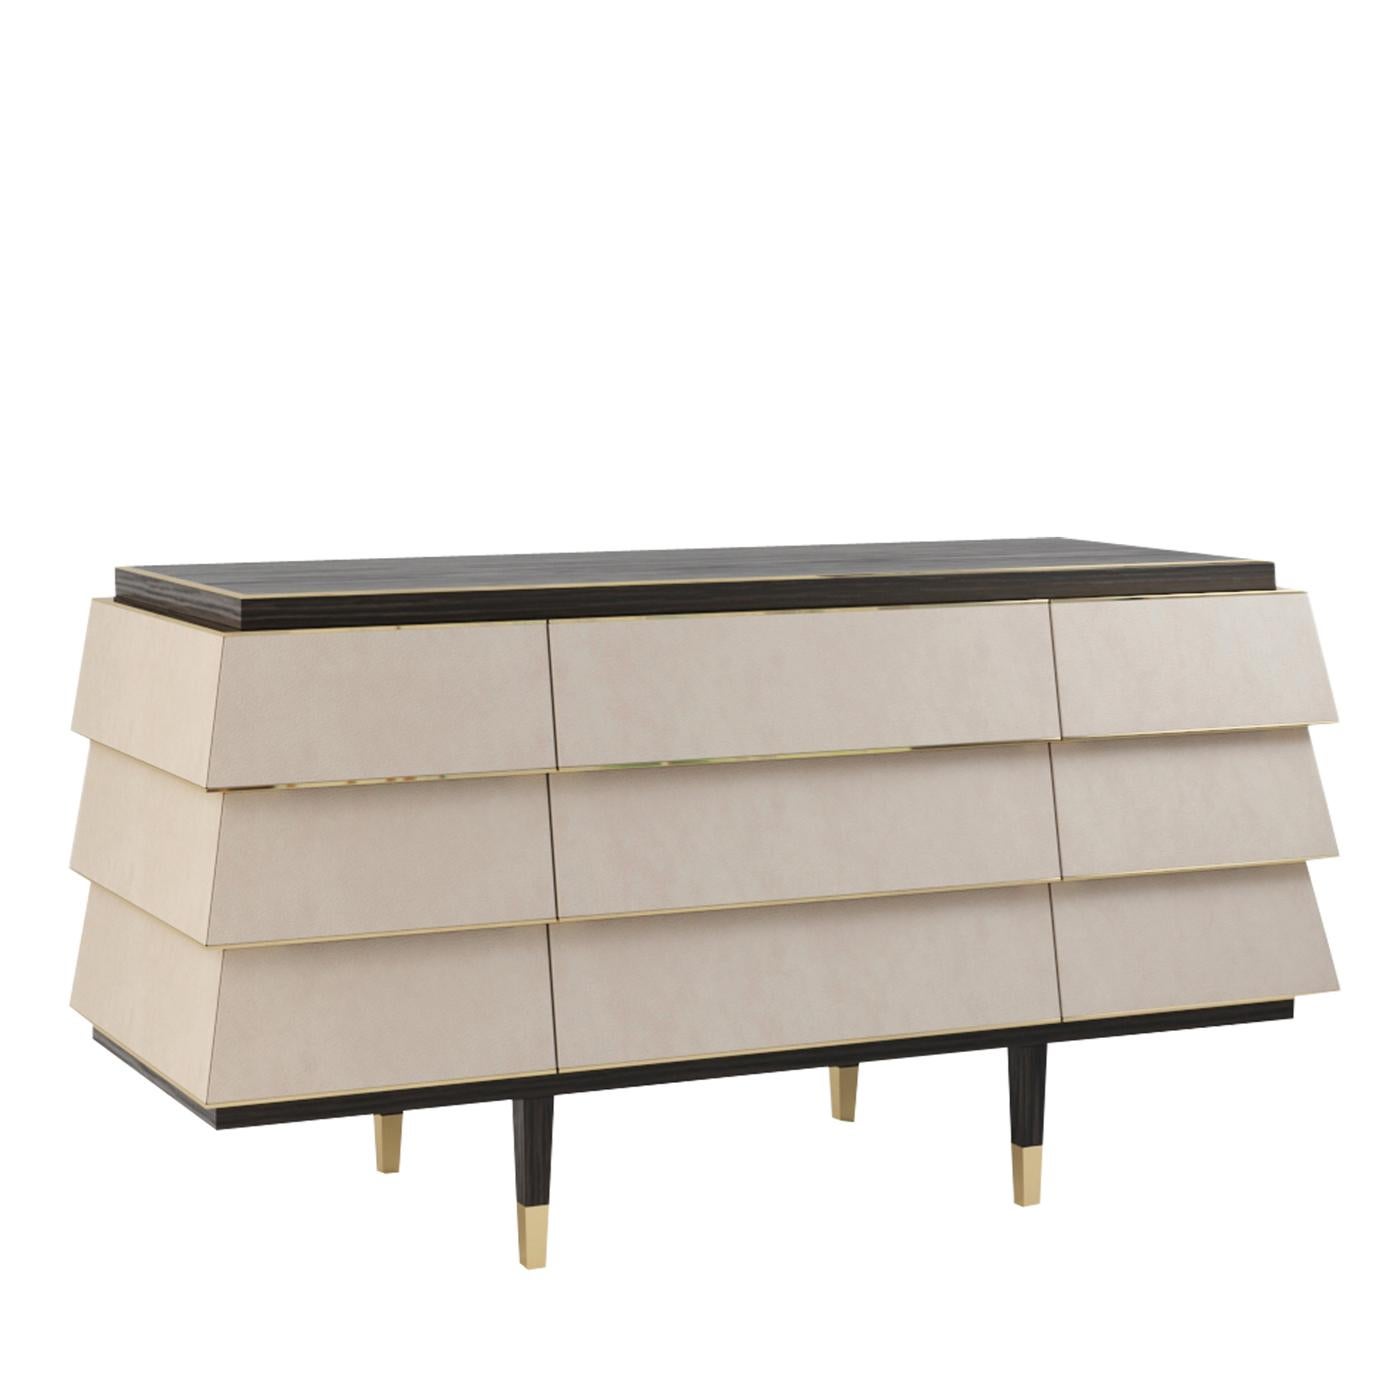 Distinguished by a stunning geometrical design and sharp lines, this exquisite dresser will be a statement piece in a refined contemporary interior. It consists of nine white-lacquered, wide drawers and a rectangular dark brown wooden top, graced by